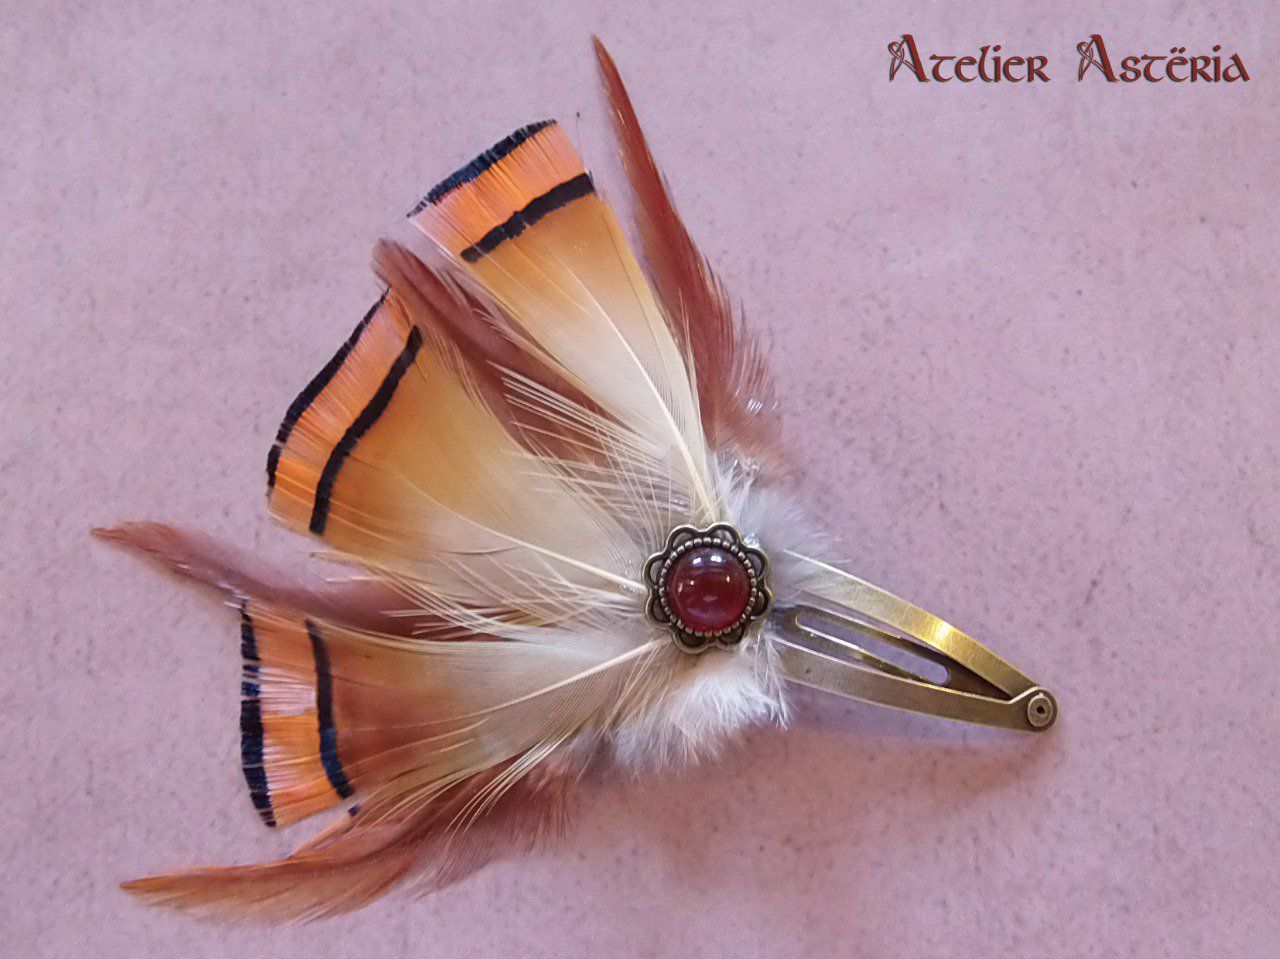 Oya : barrette à plumes pierres semi-précieuse / feathers and gemstone hair clip